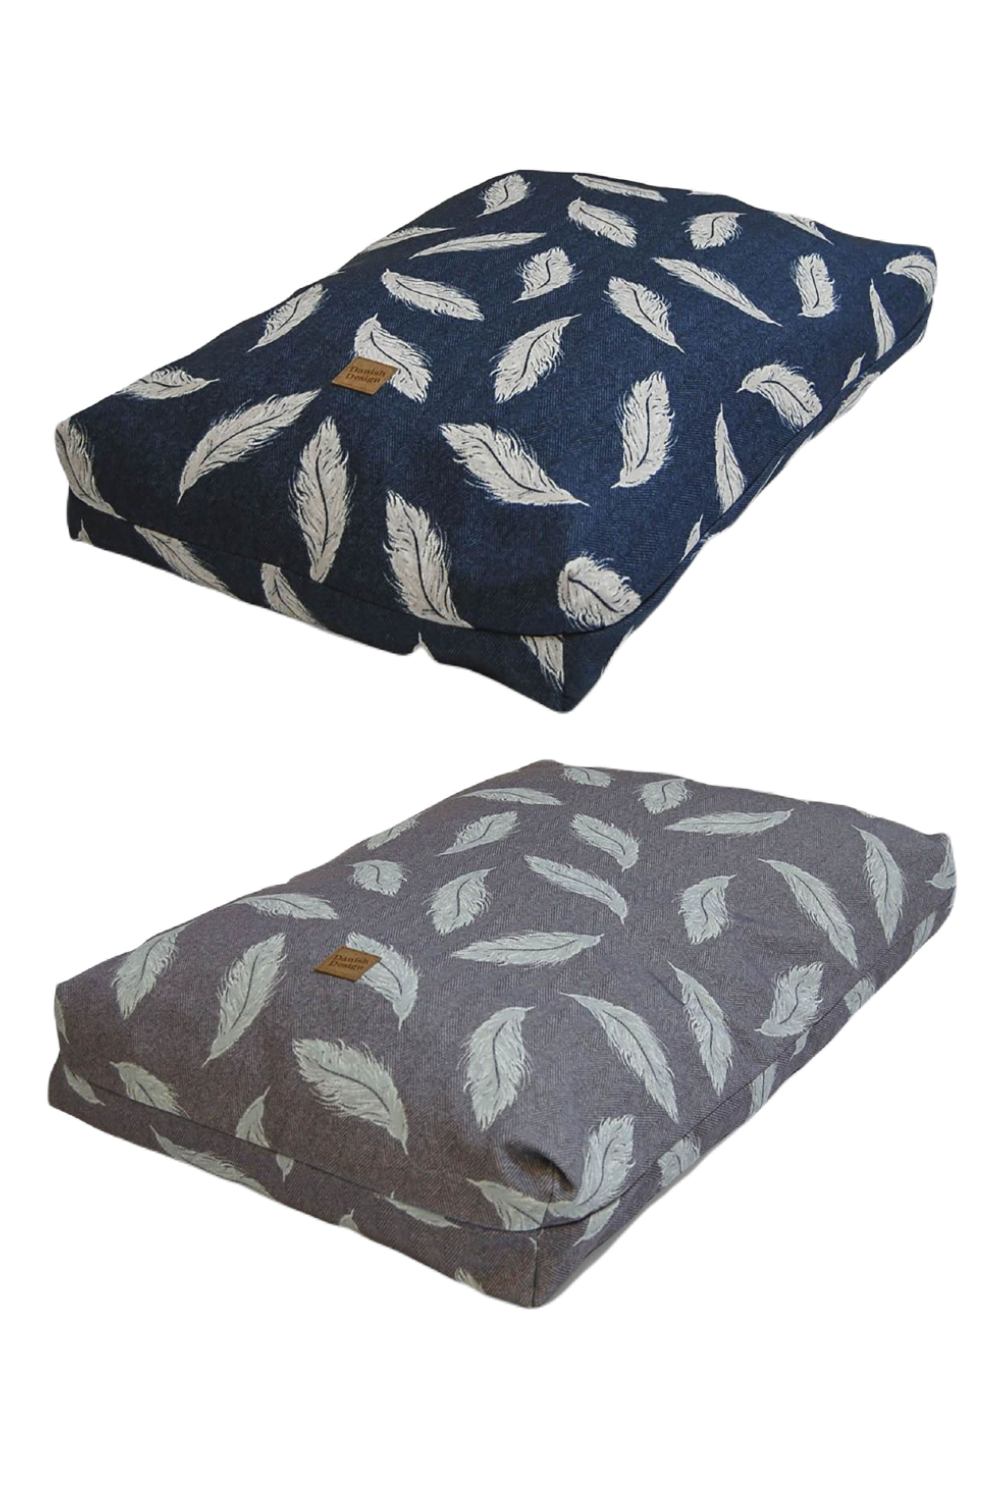 Danish Design Feather Retreat Duvet Cover in Navy/Stone and Grey/Duck Egg